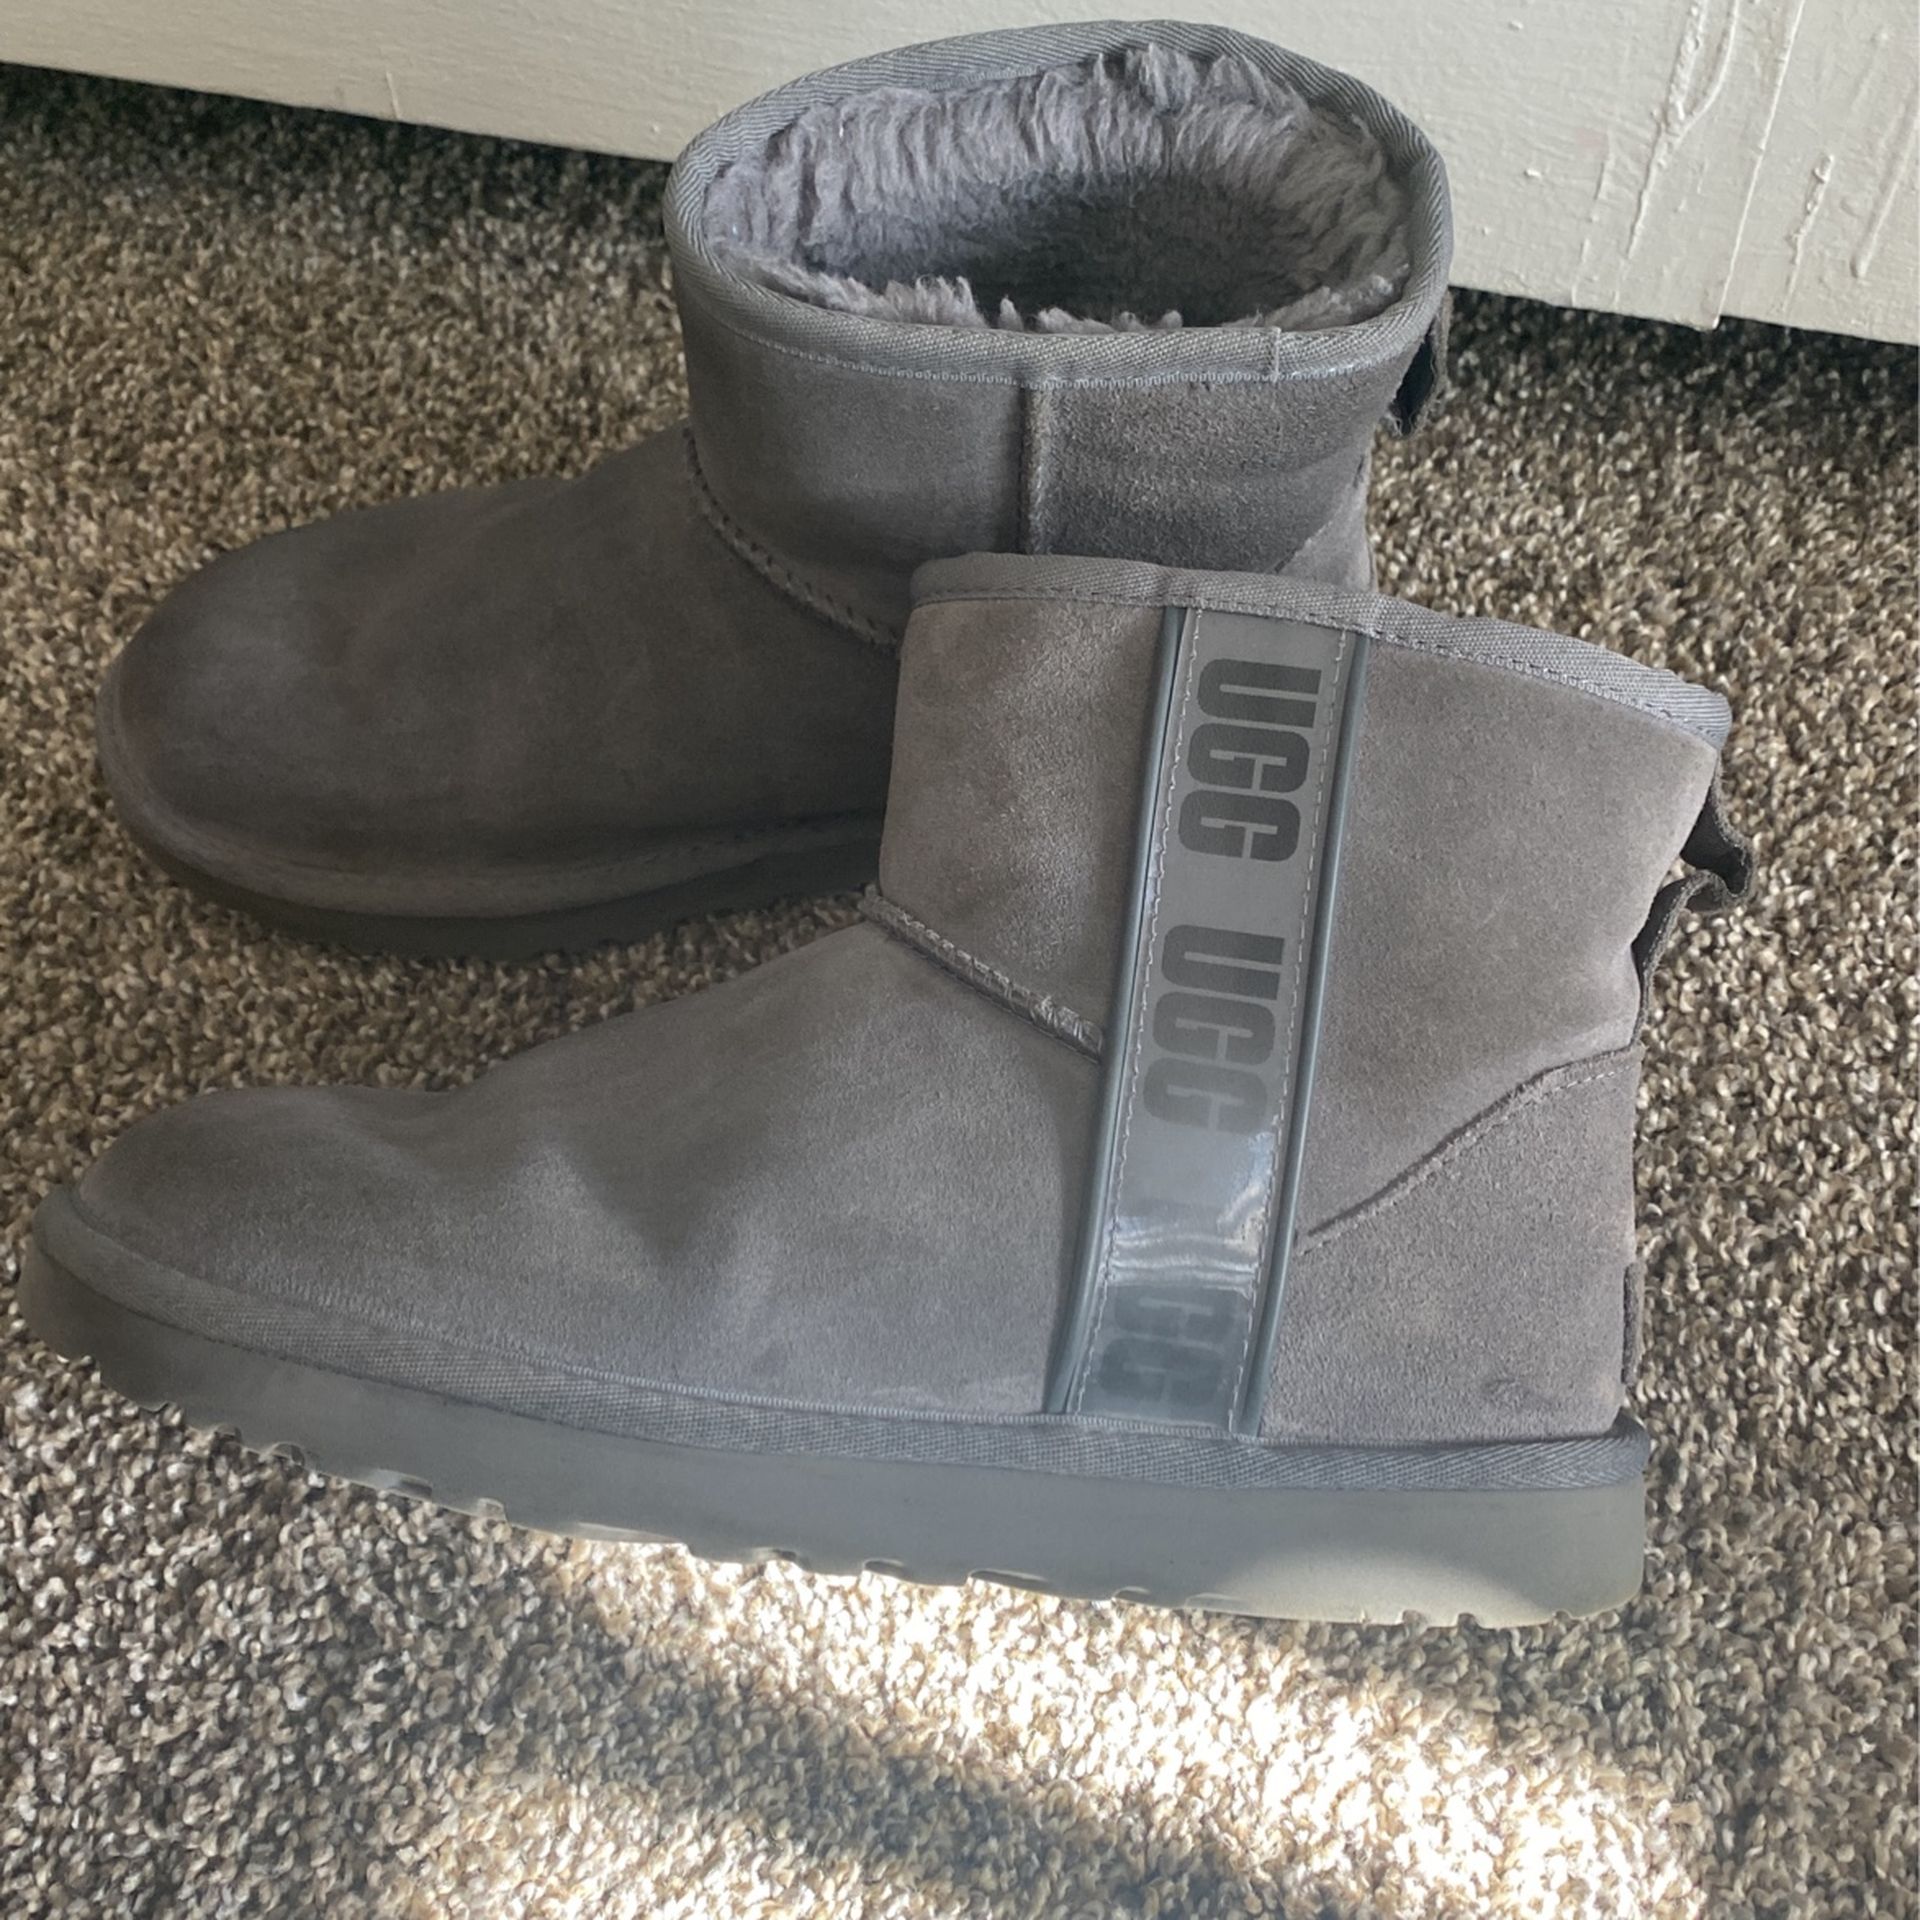 UGG Boots Size 9